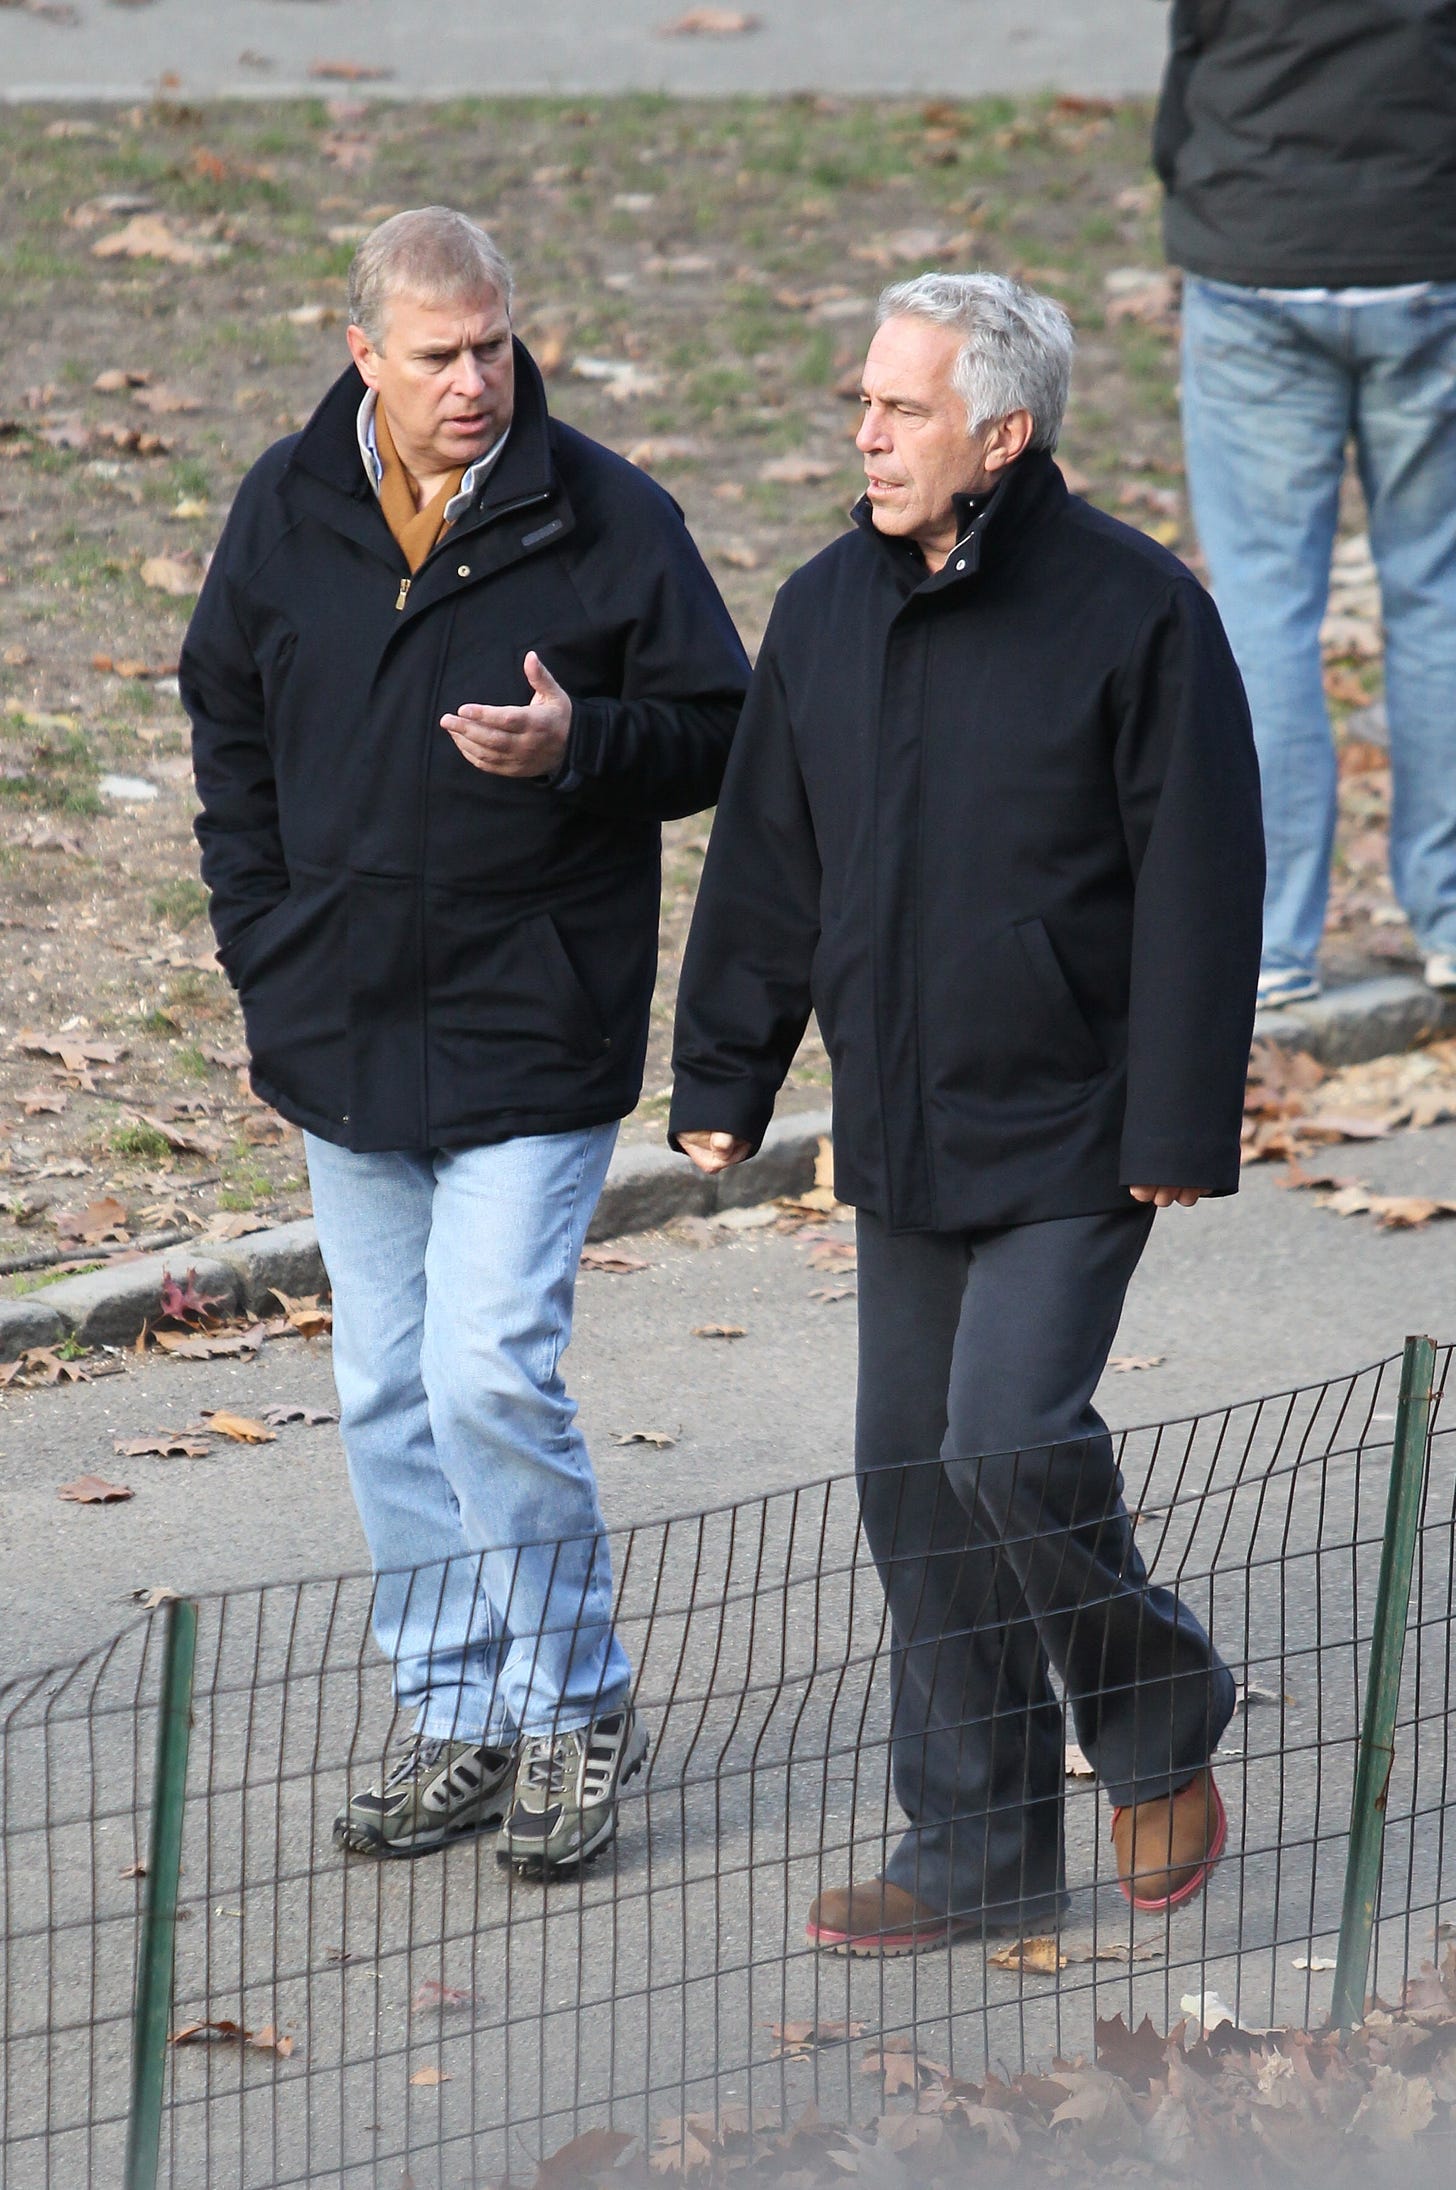 Prince Andrew and Jeffrey Epstein in New York’s Central Park.